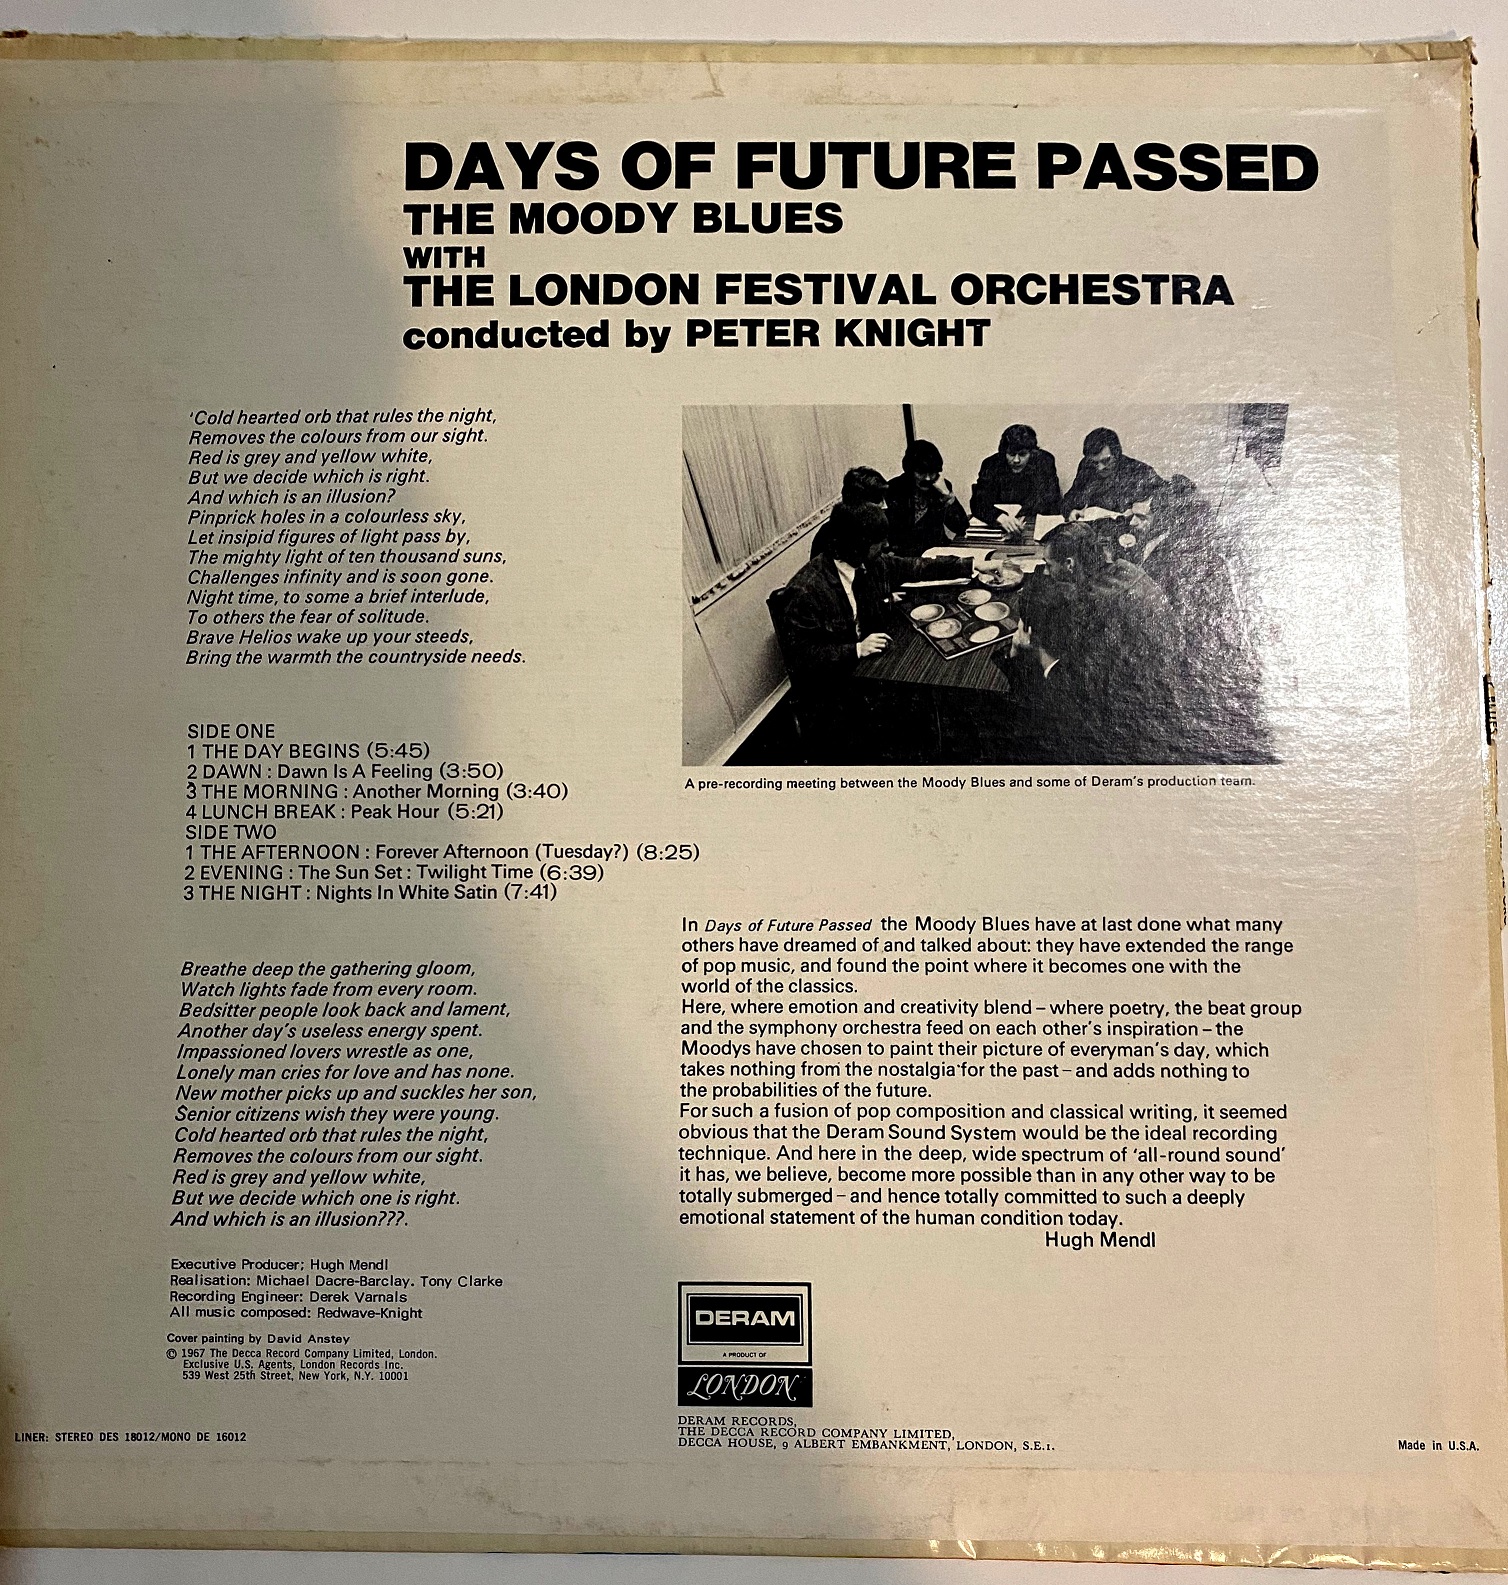 Step Back in Time with Moody Blues' Timeless Vinyl Record |Days of Future Passed